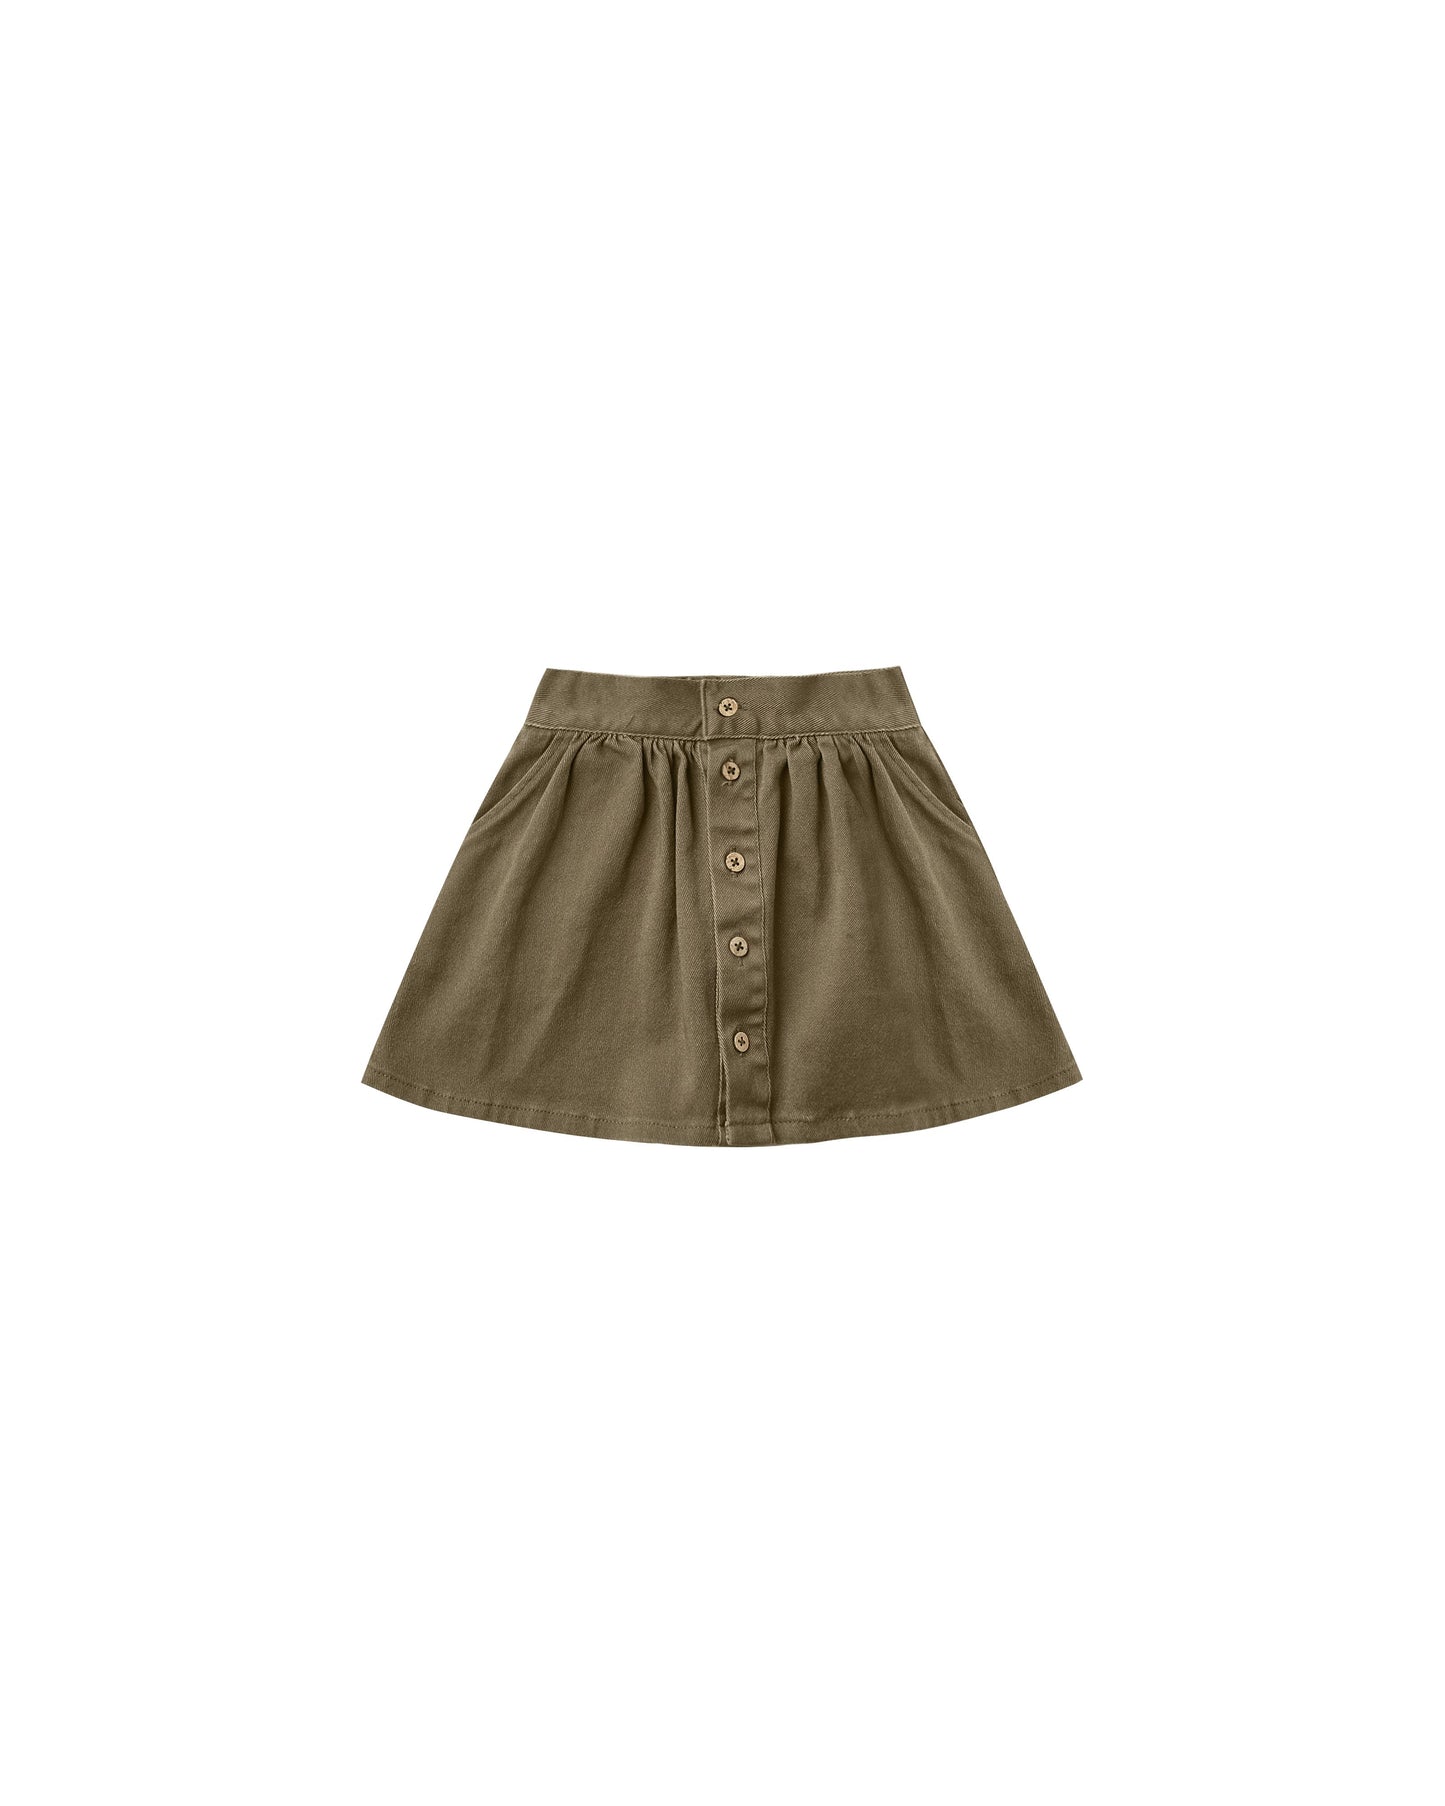 Rylee + Cru - Button Front Mini Skirt - Olive - LAST ONES 6-7Y + 8-9Y